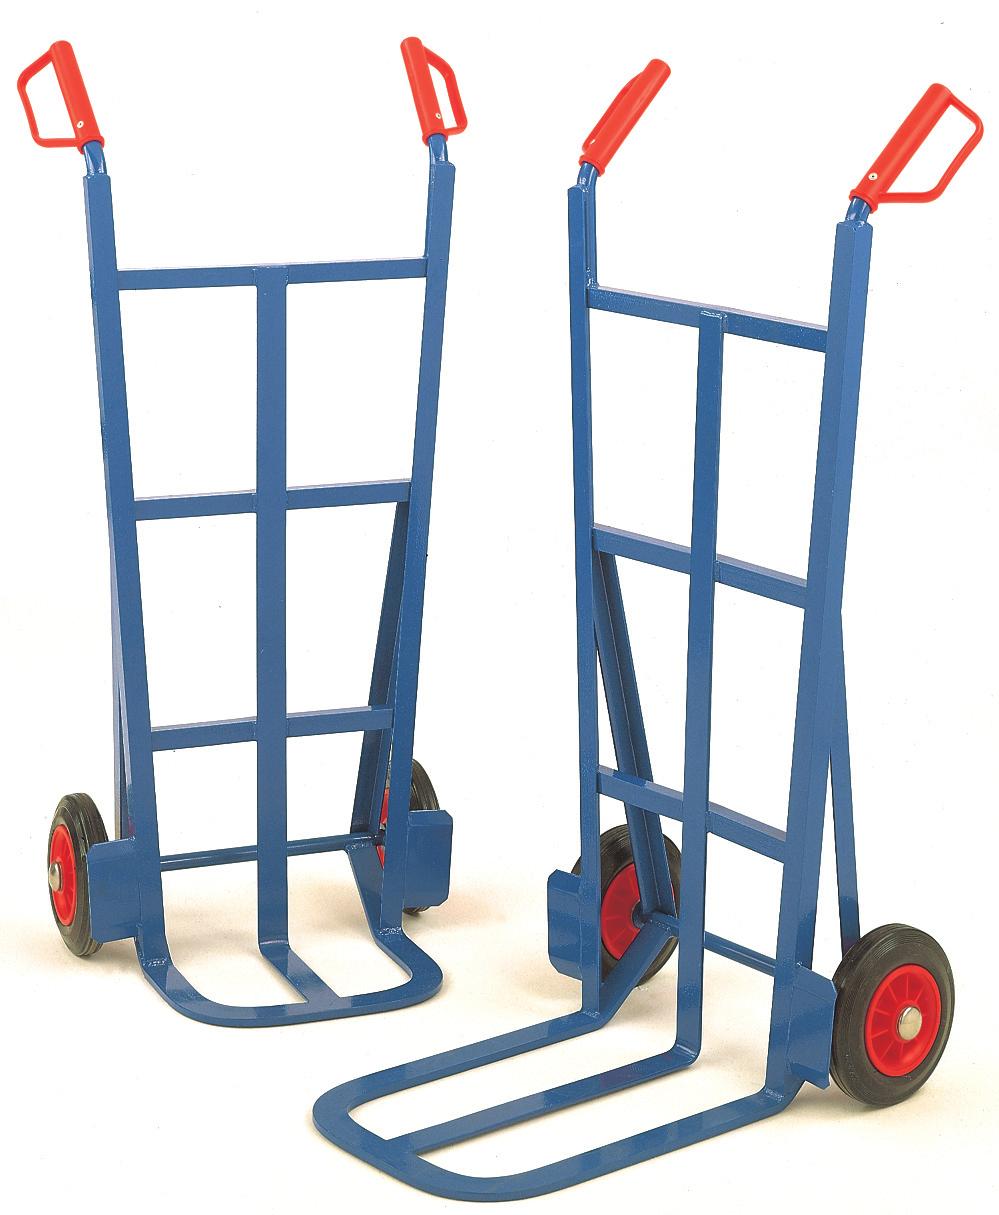 78 Traditional Traditional Splay-back Trucks Still in constant demand throughout industry Capacity 200kg Choose from 3 toe iron sizes Traditional British An original design still meeting today s